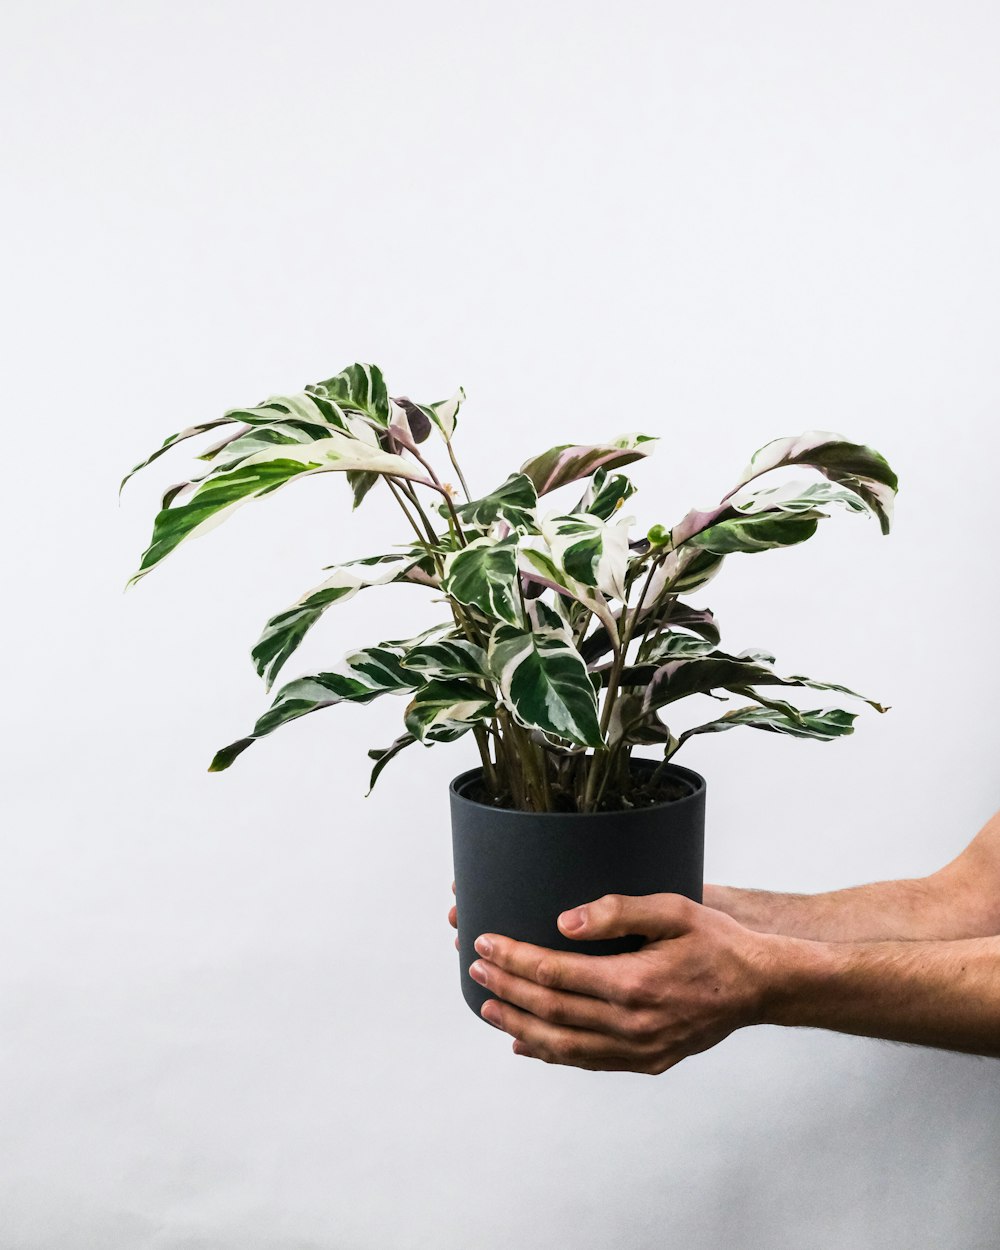 person holding green plant on black pot